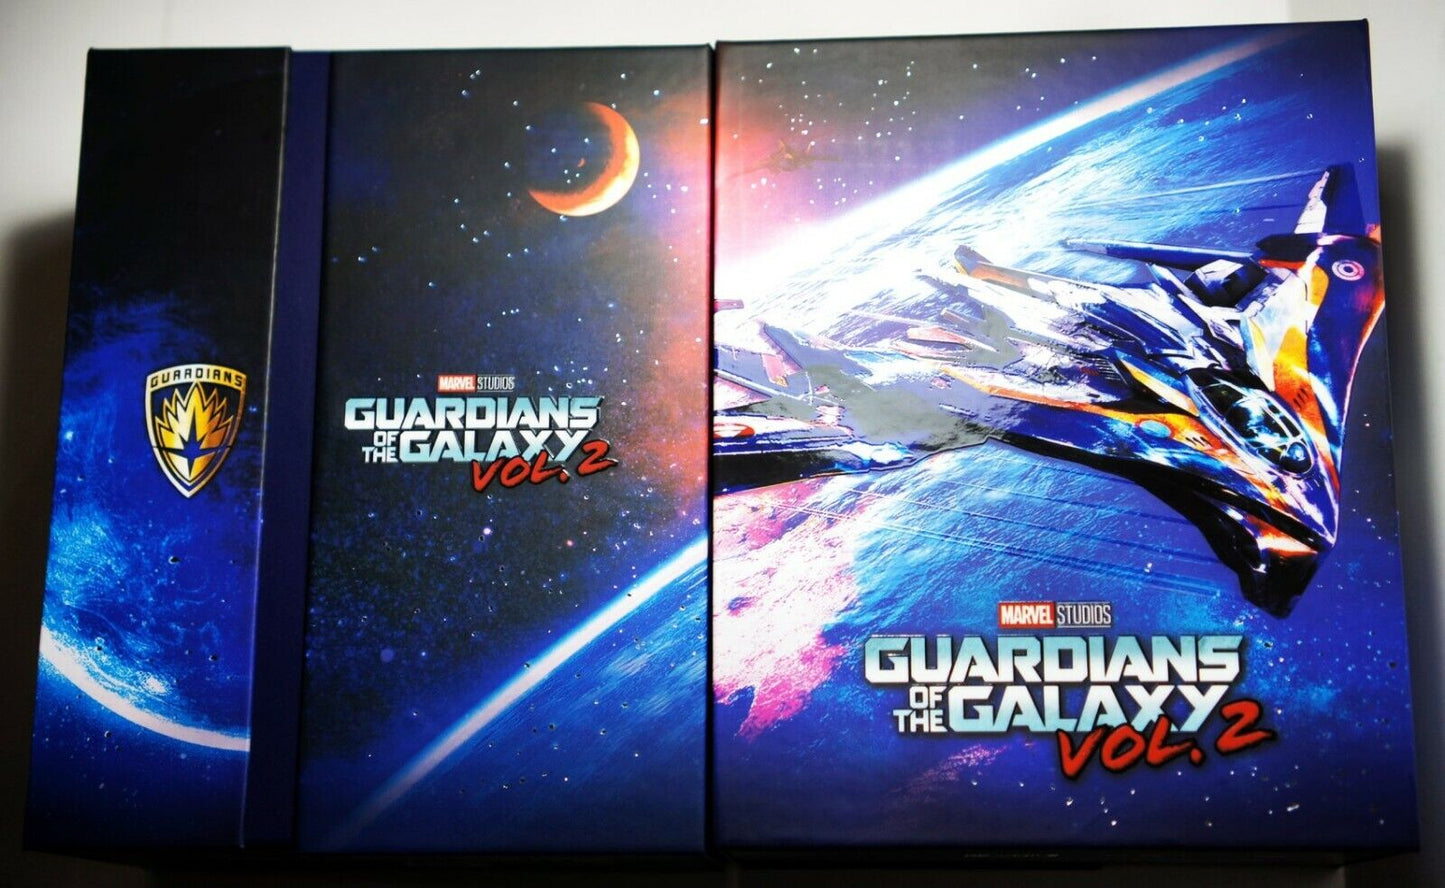 Guardians of the Galaxy Vol. 2 3D+2D Blu-ray Steelbook WeET Exclusive One Click Box Set